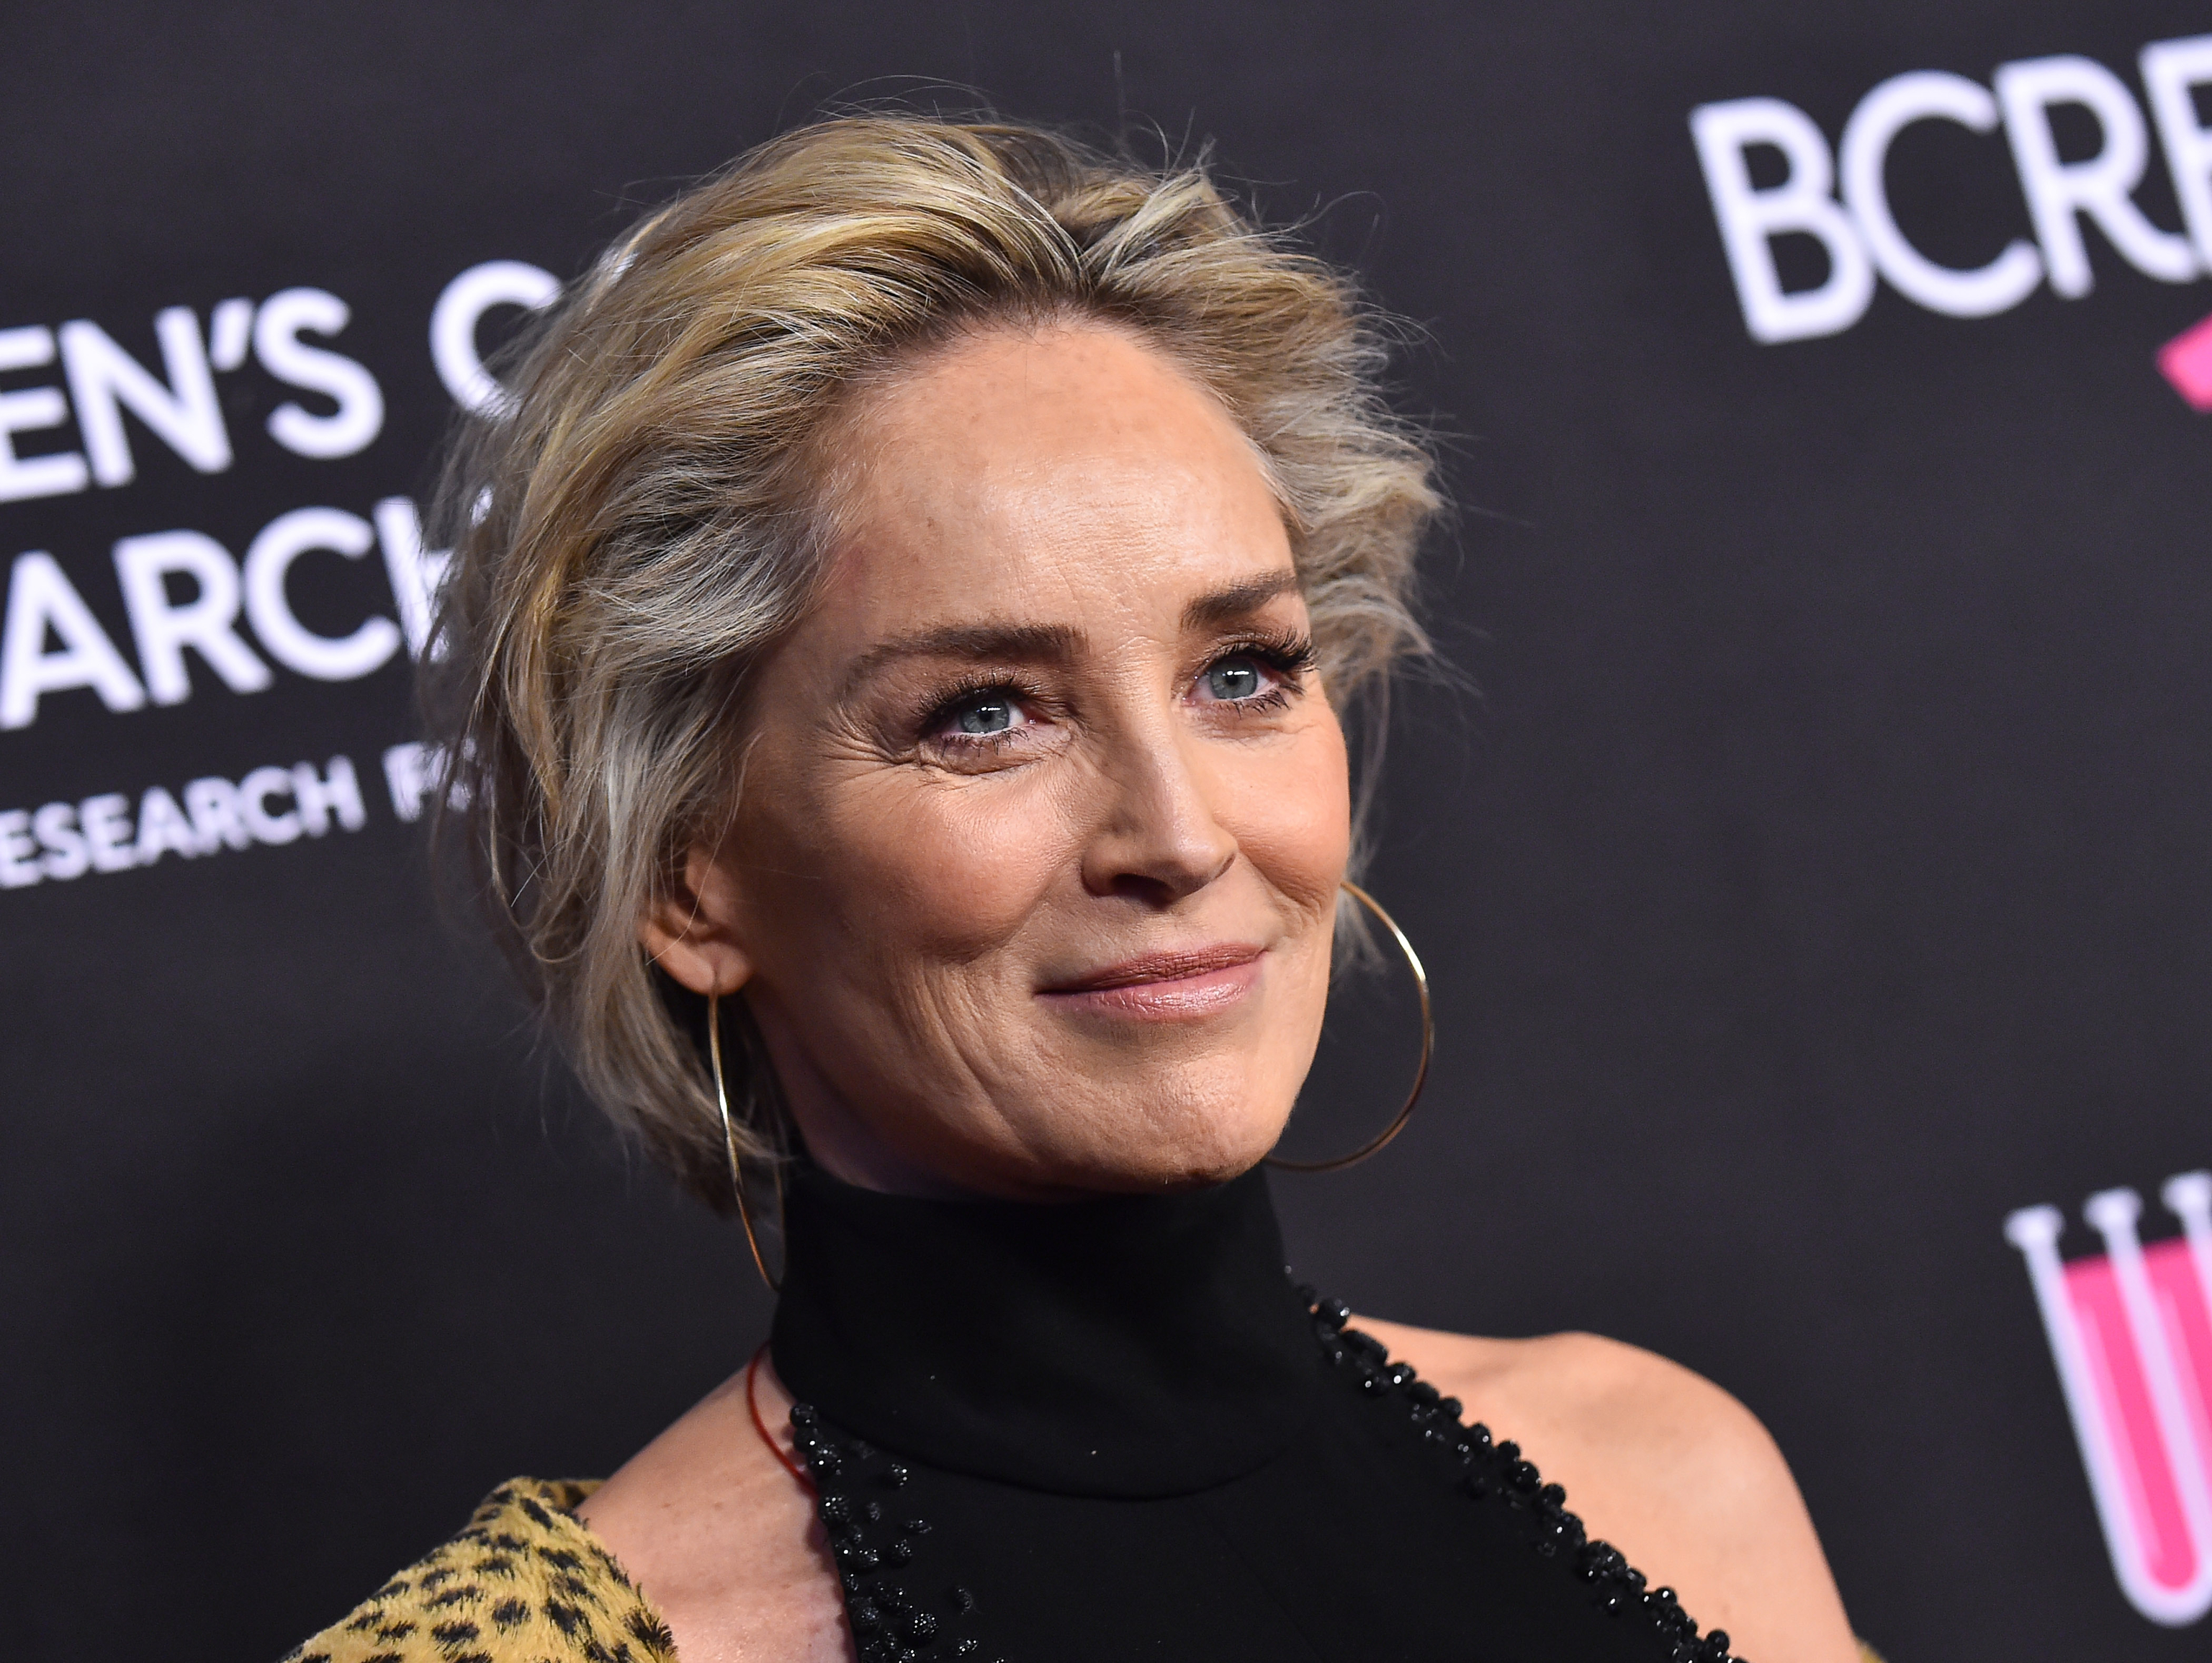 Sharon Stone, pictured in February 2019.